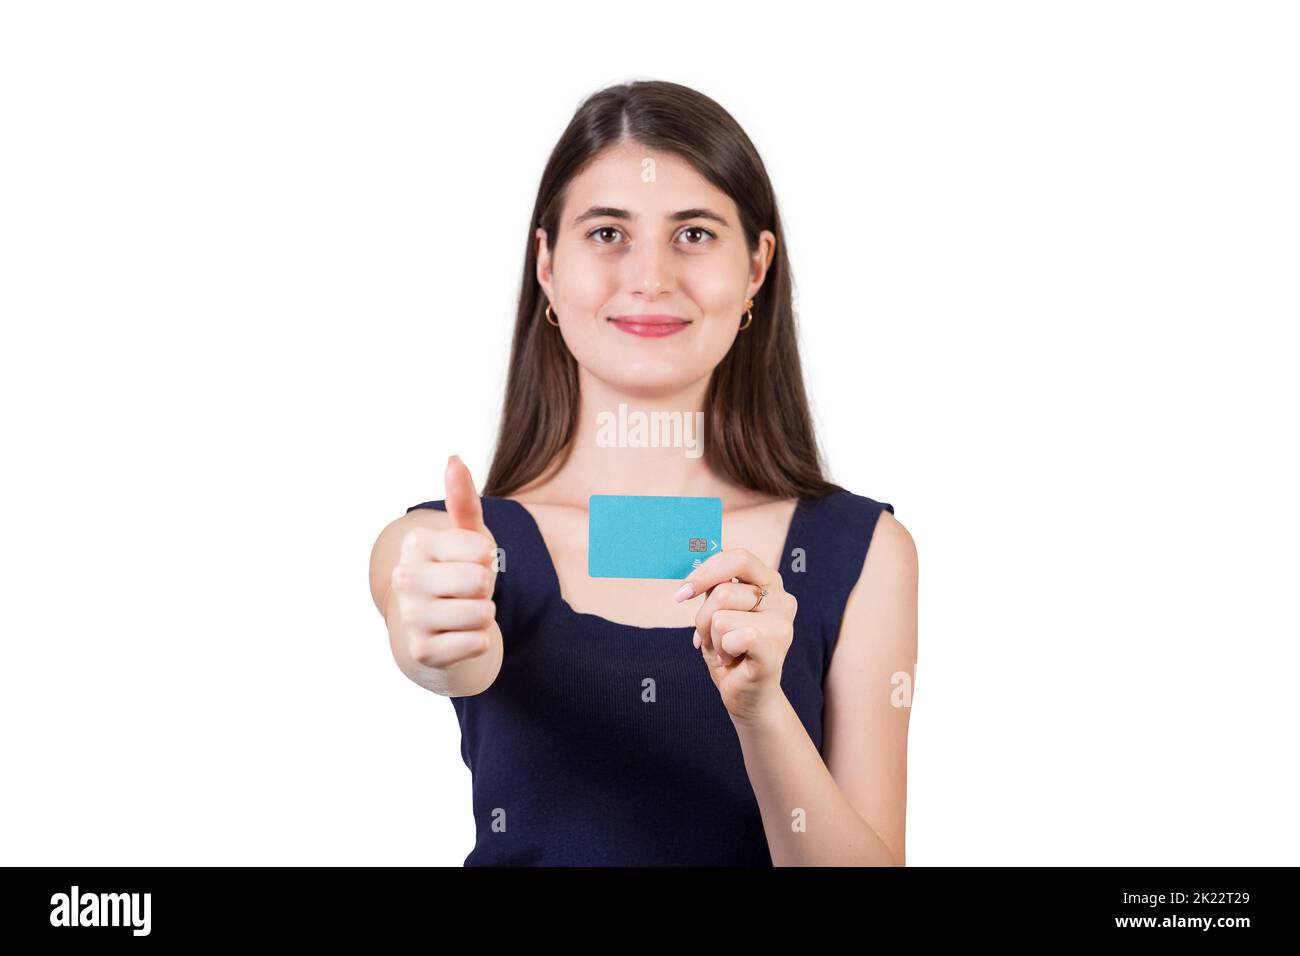 Cheerful young woman showing thumb up positive gesture while holding a credit card in other hand, isolated on white background with copy space. Approv Stock Photo